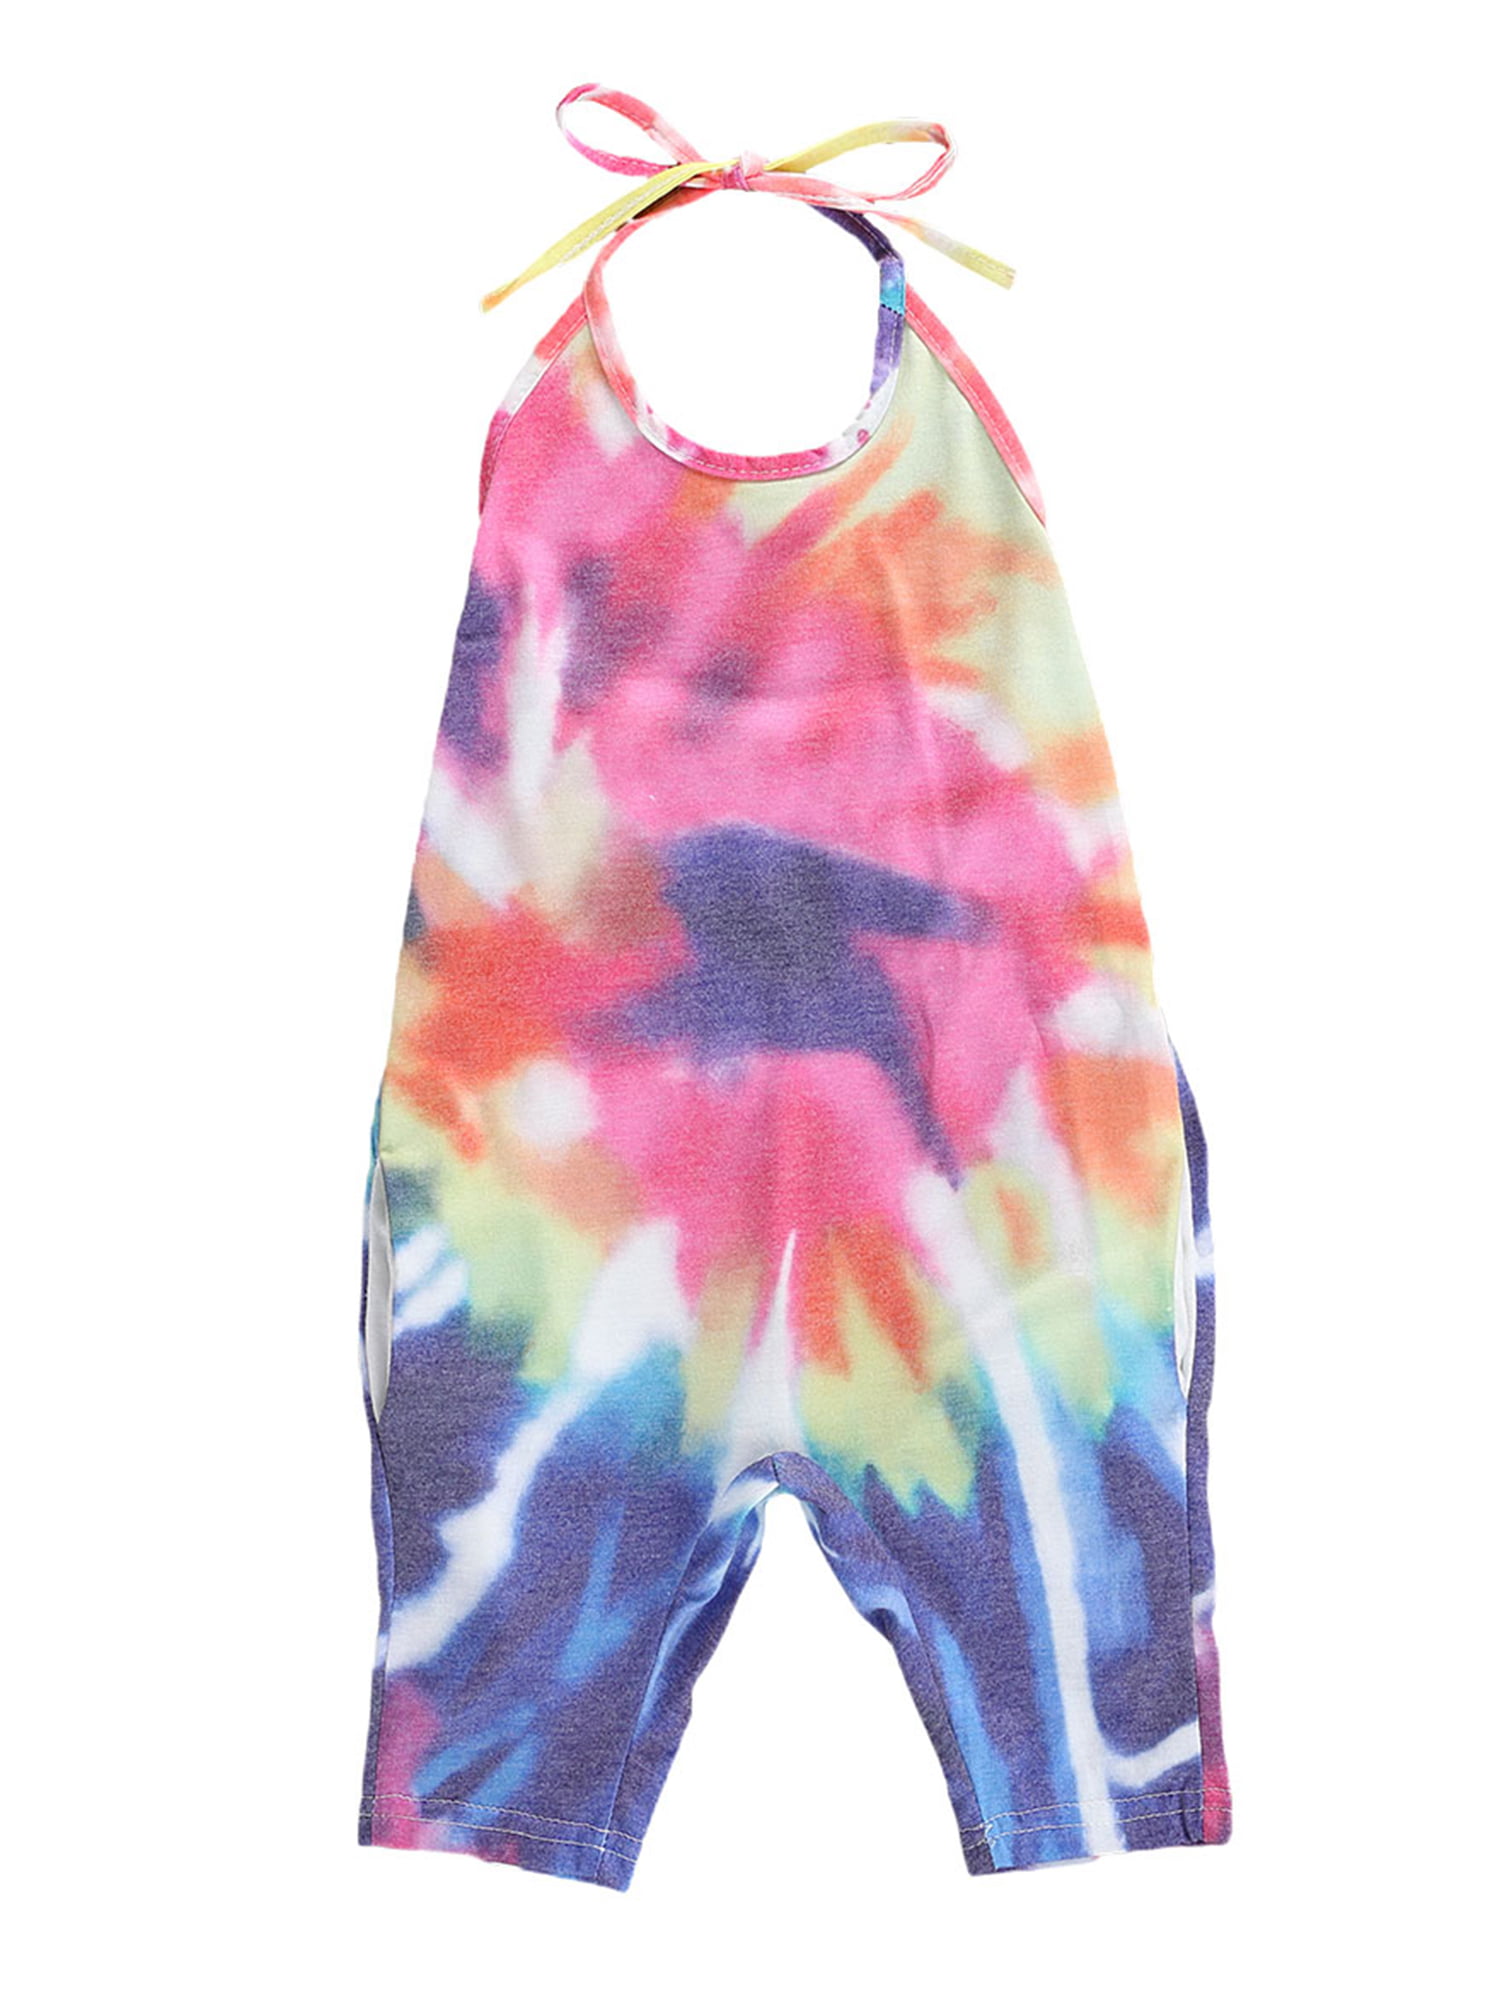 Kids Girls Beautiful Tie &Dye Outfit Playsuits Jumpsuits Romper Summer Dress Top